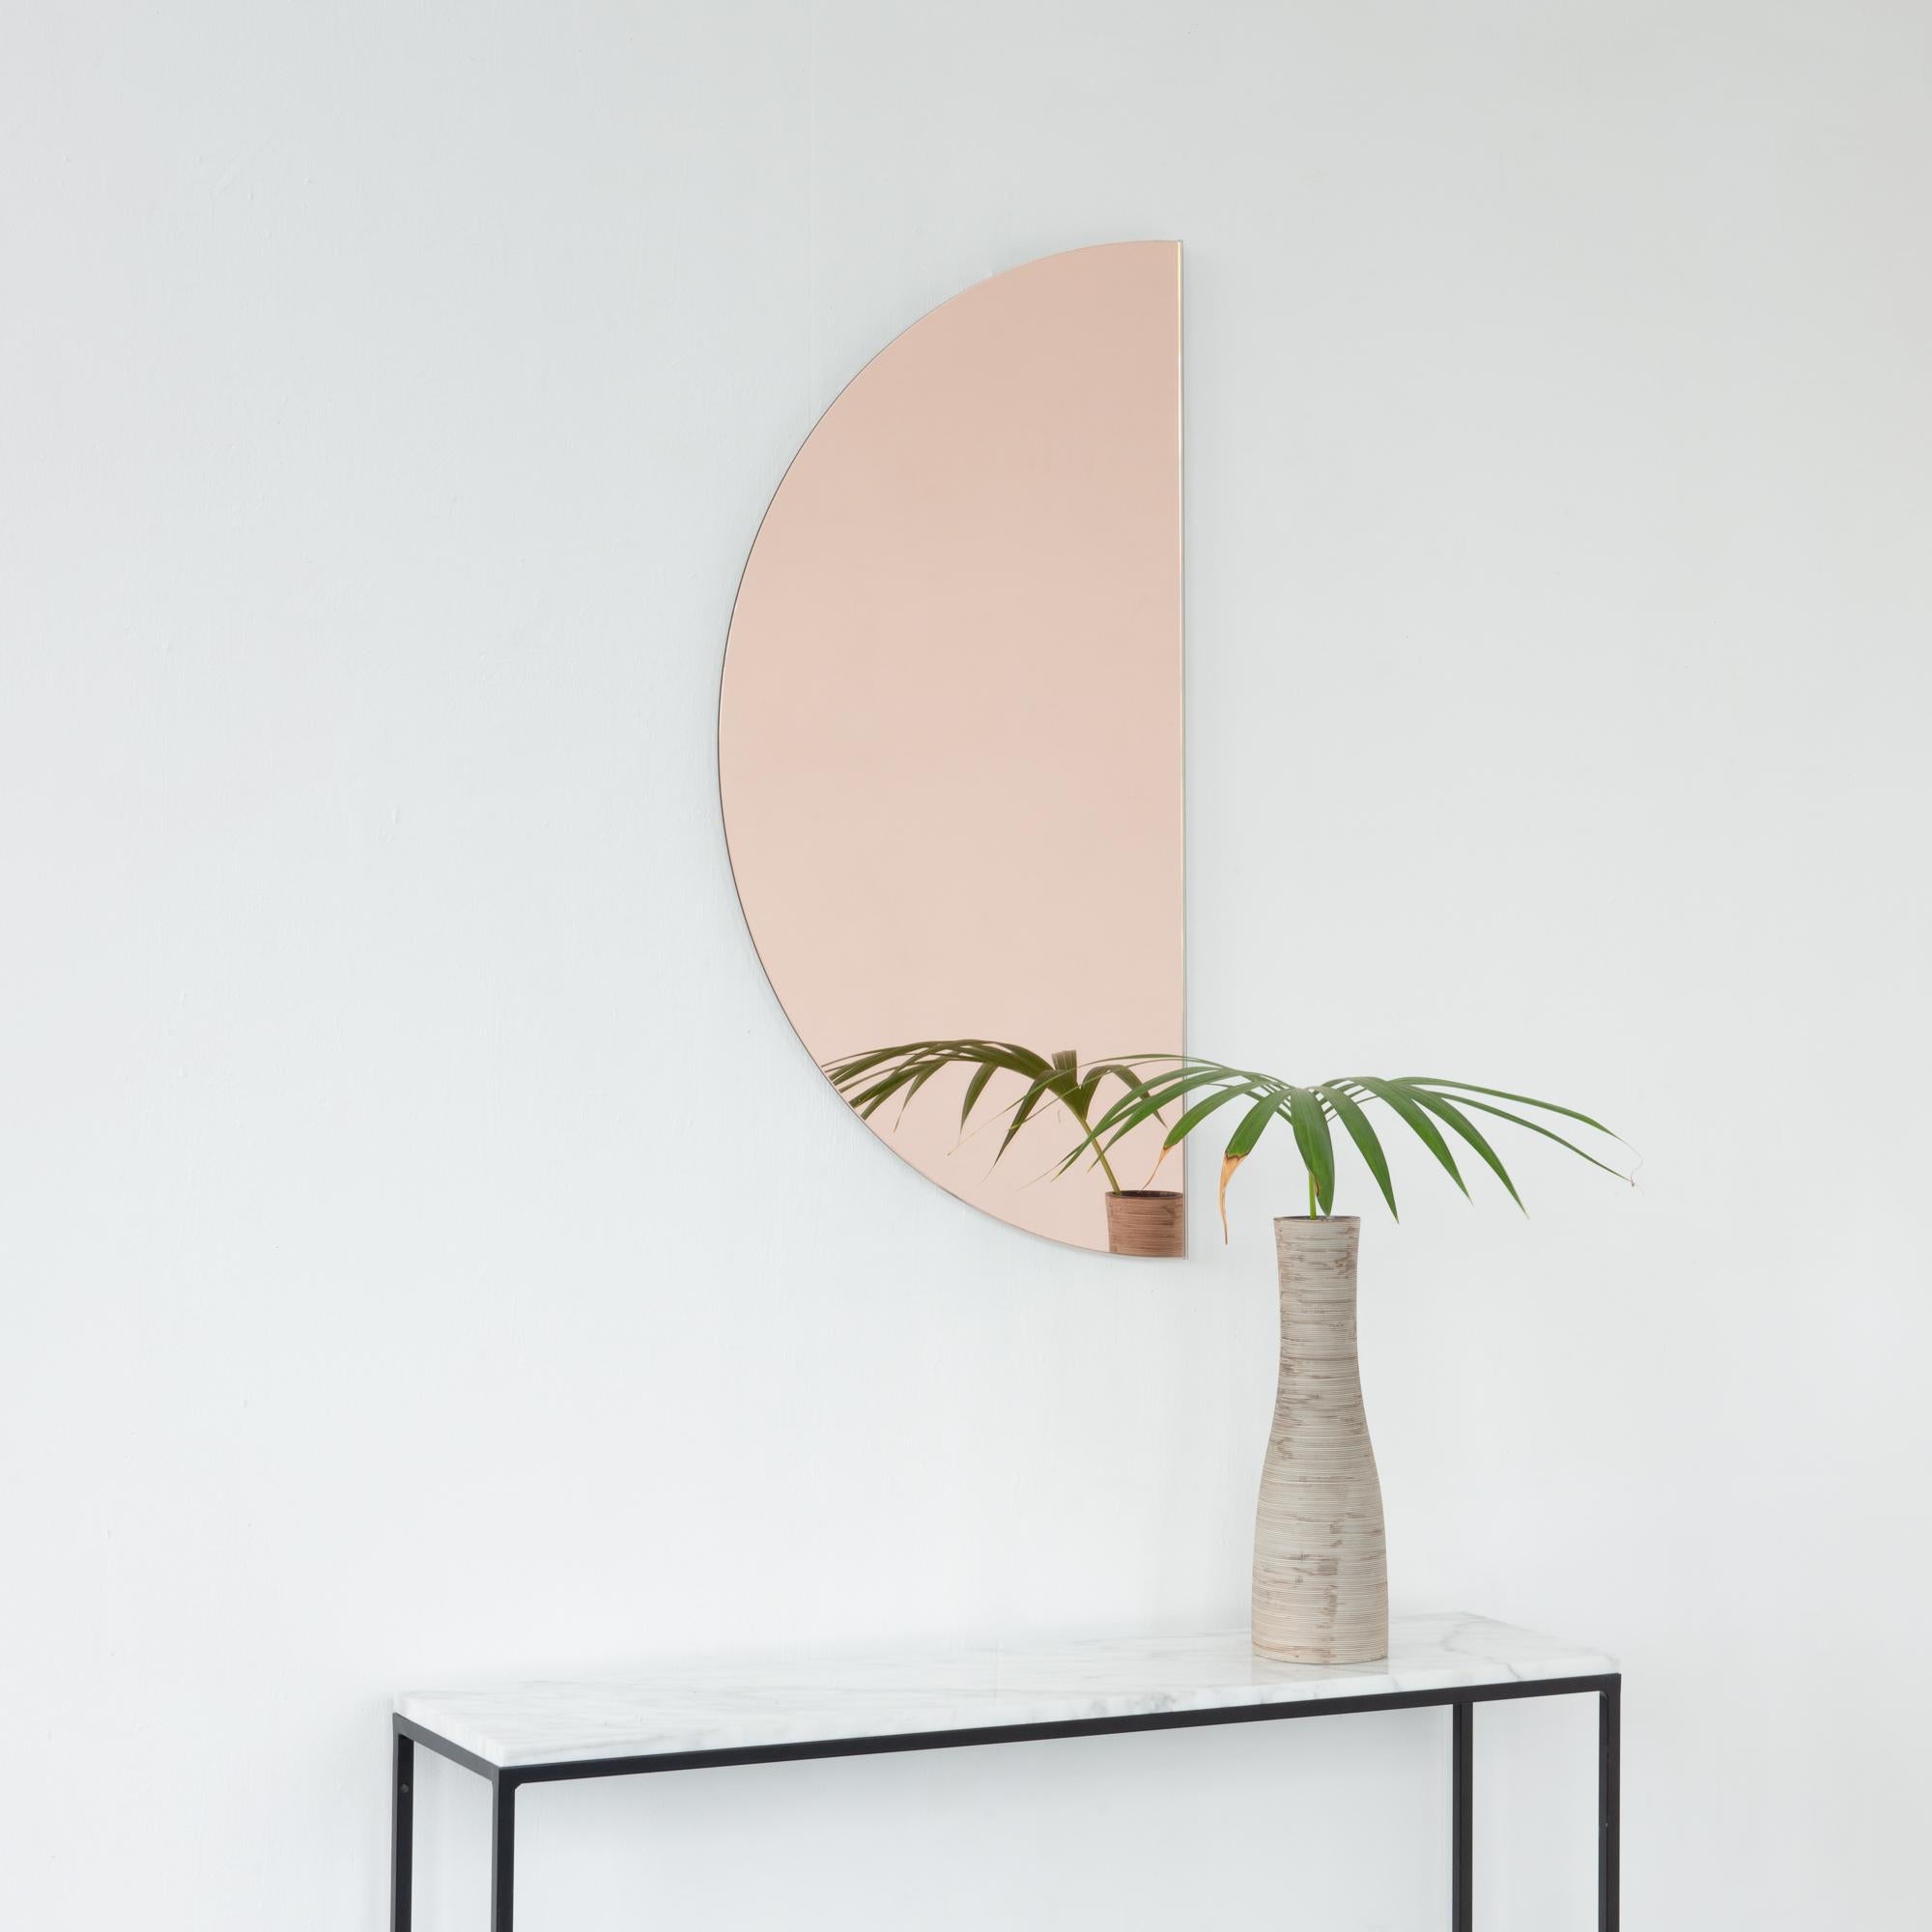 Minimalist half-moon rose gold (peach) tinted frameless mirror with a floating effect. Fitted with a quality and ingenious hanging system for a flexible installation in 4 different directions. Designed and made in London, UK. 

The backing has a